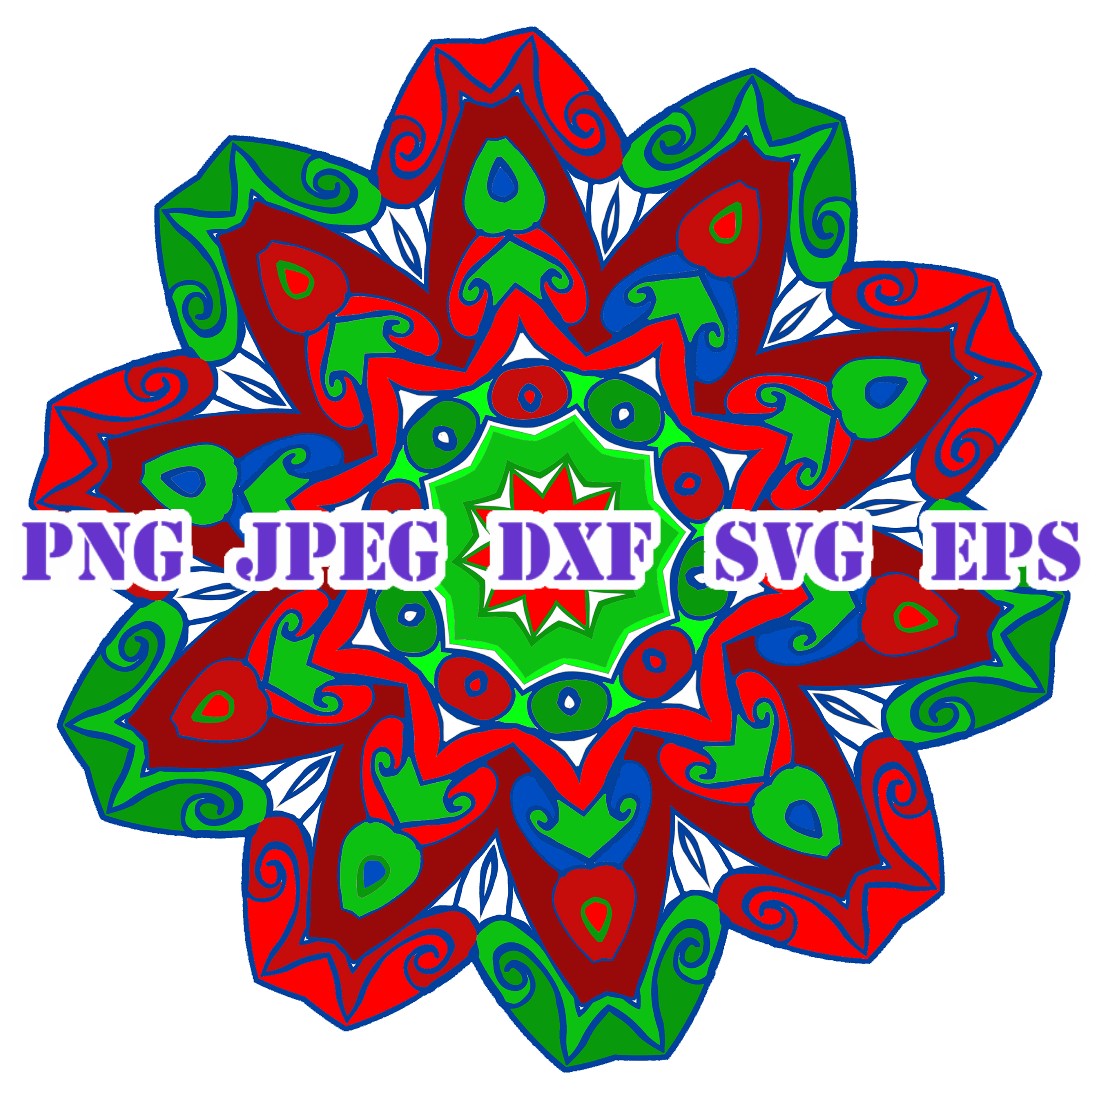 Holiday Snowflake Colorful SVG main cover.